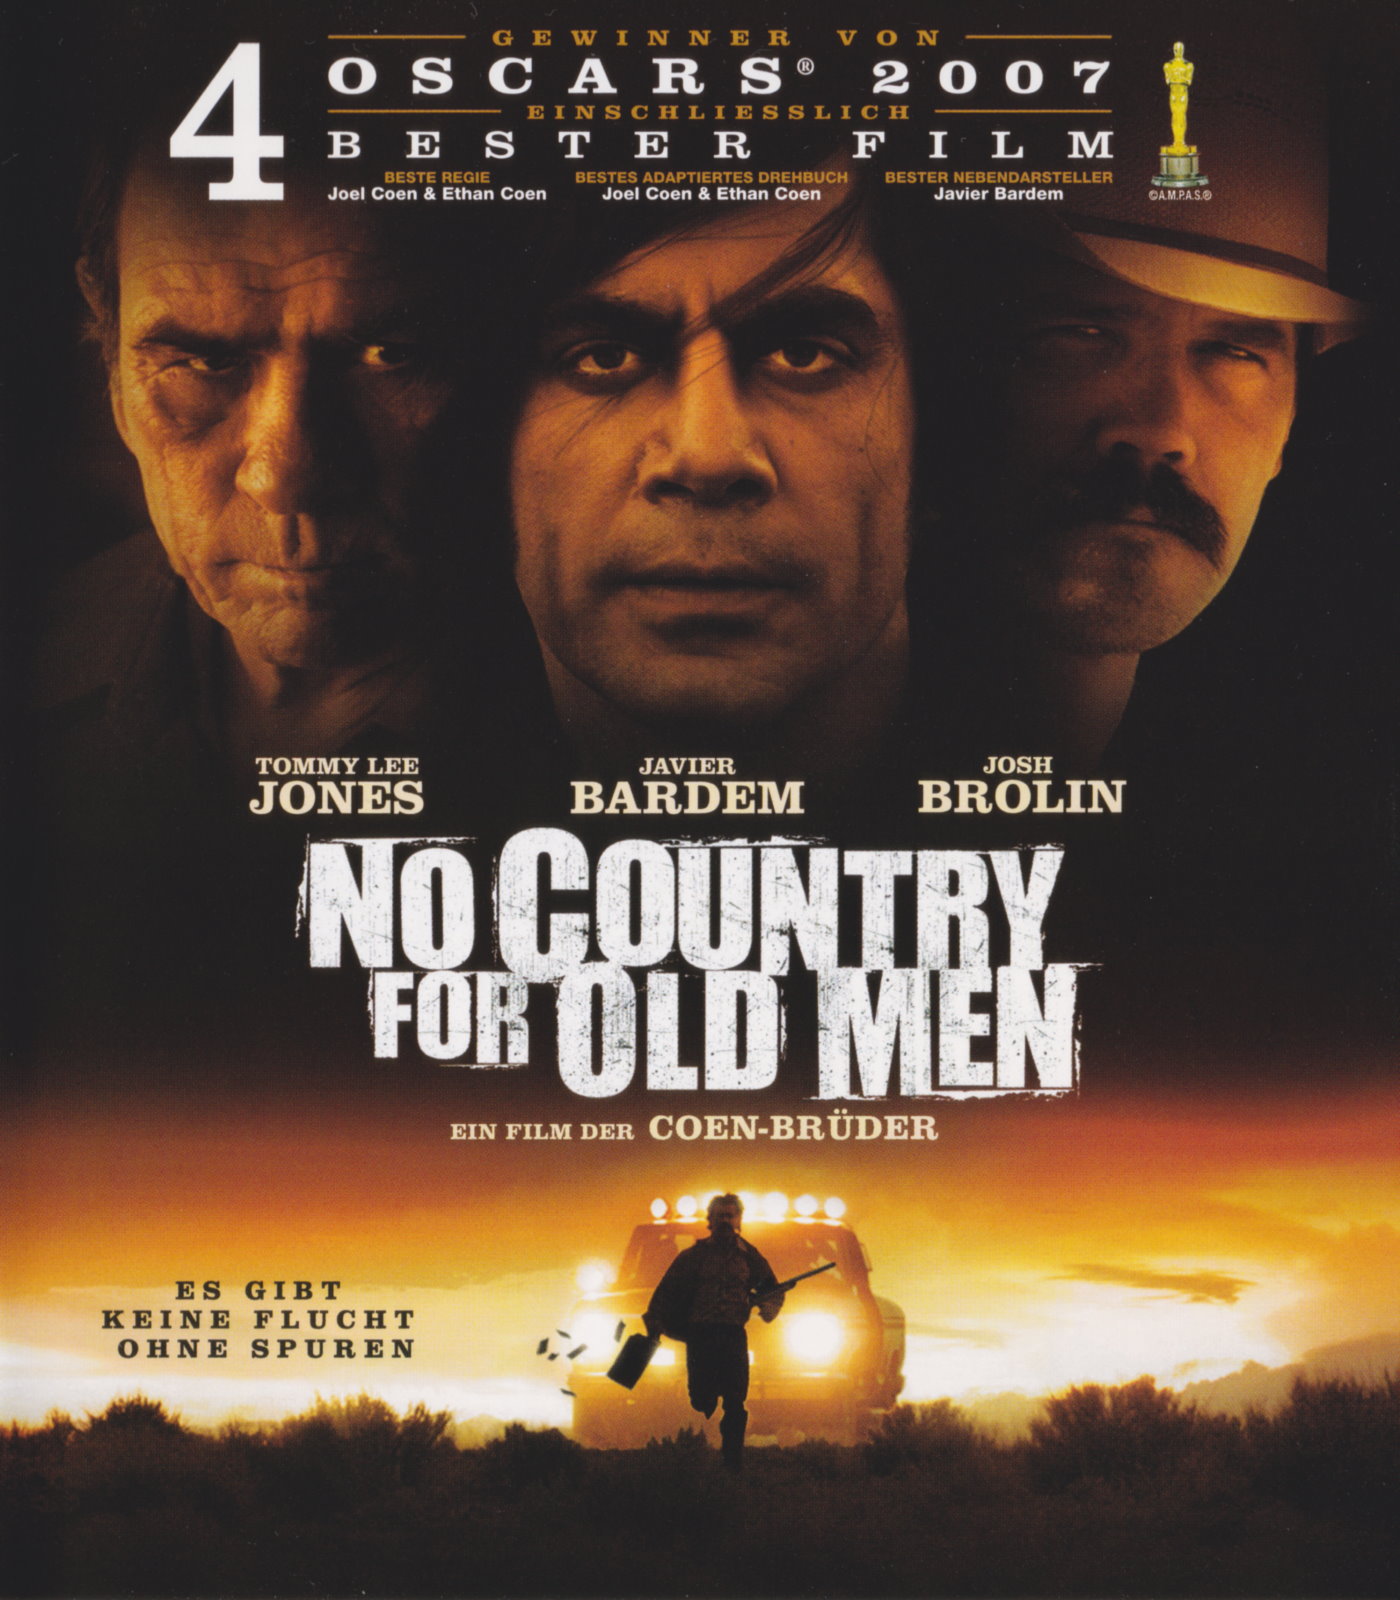 Cover - No Country For Old Men.jpg